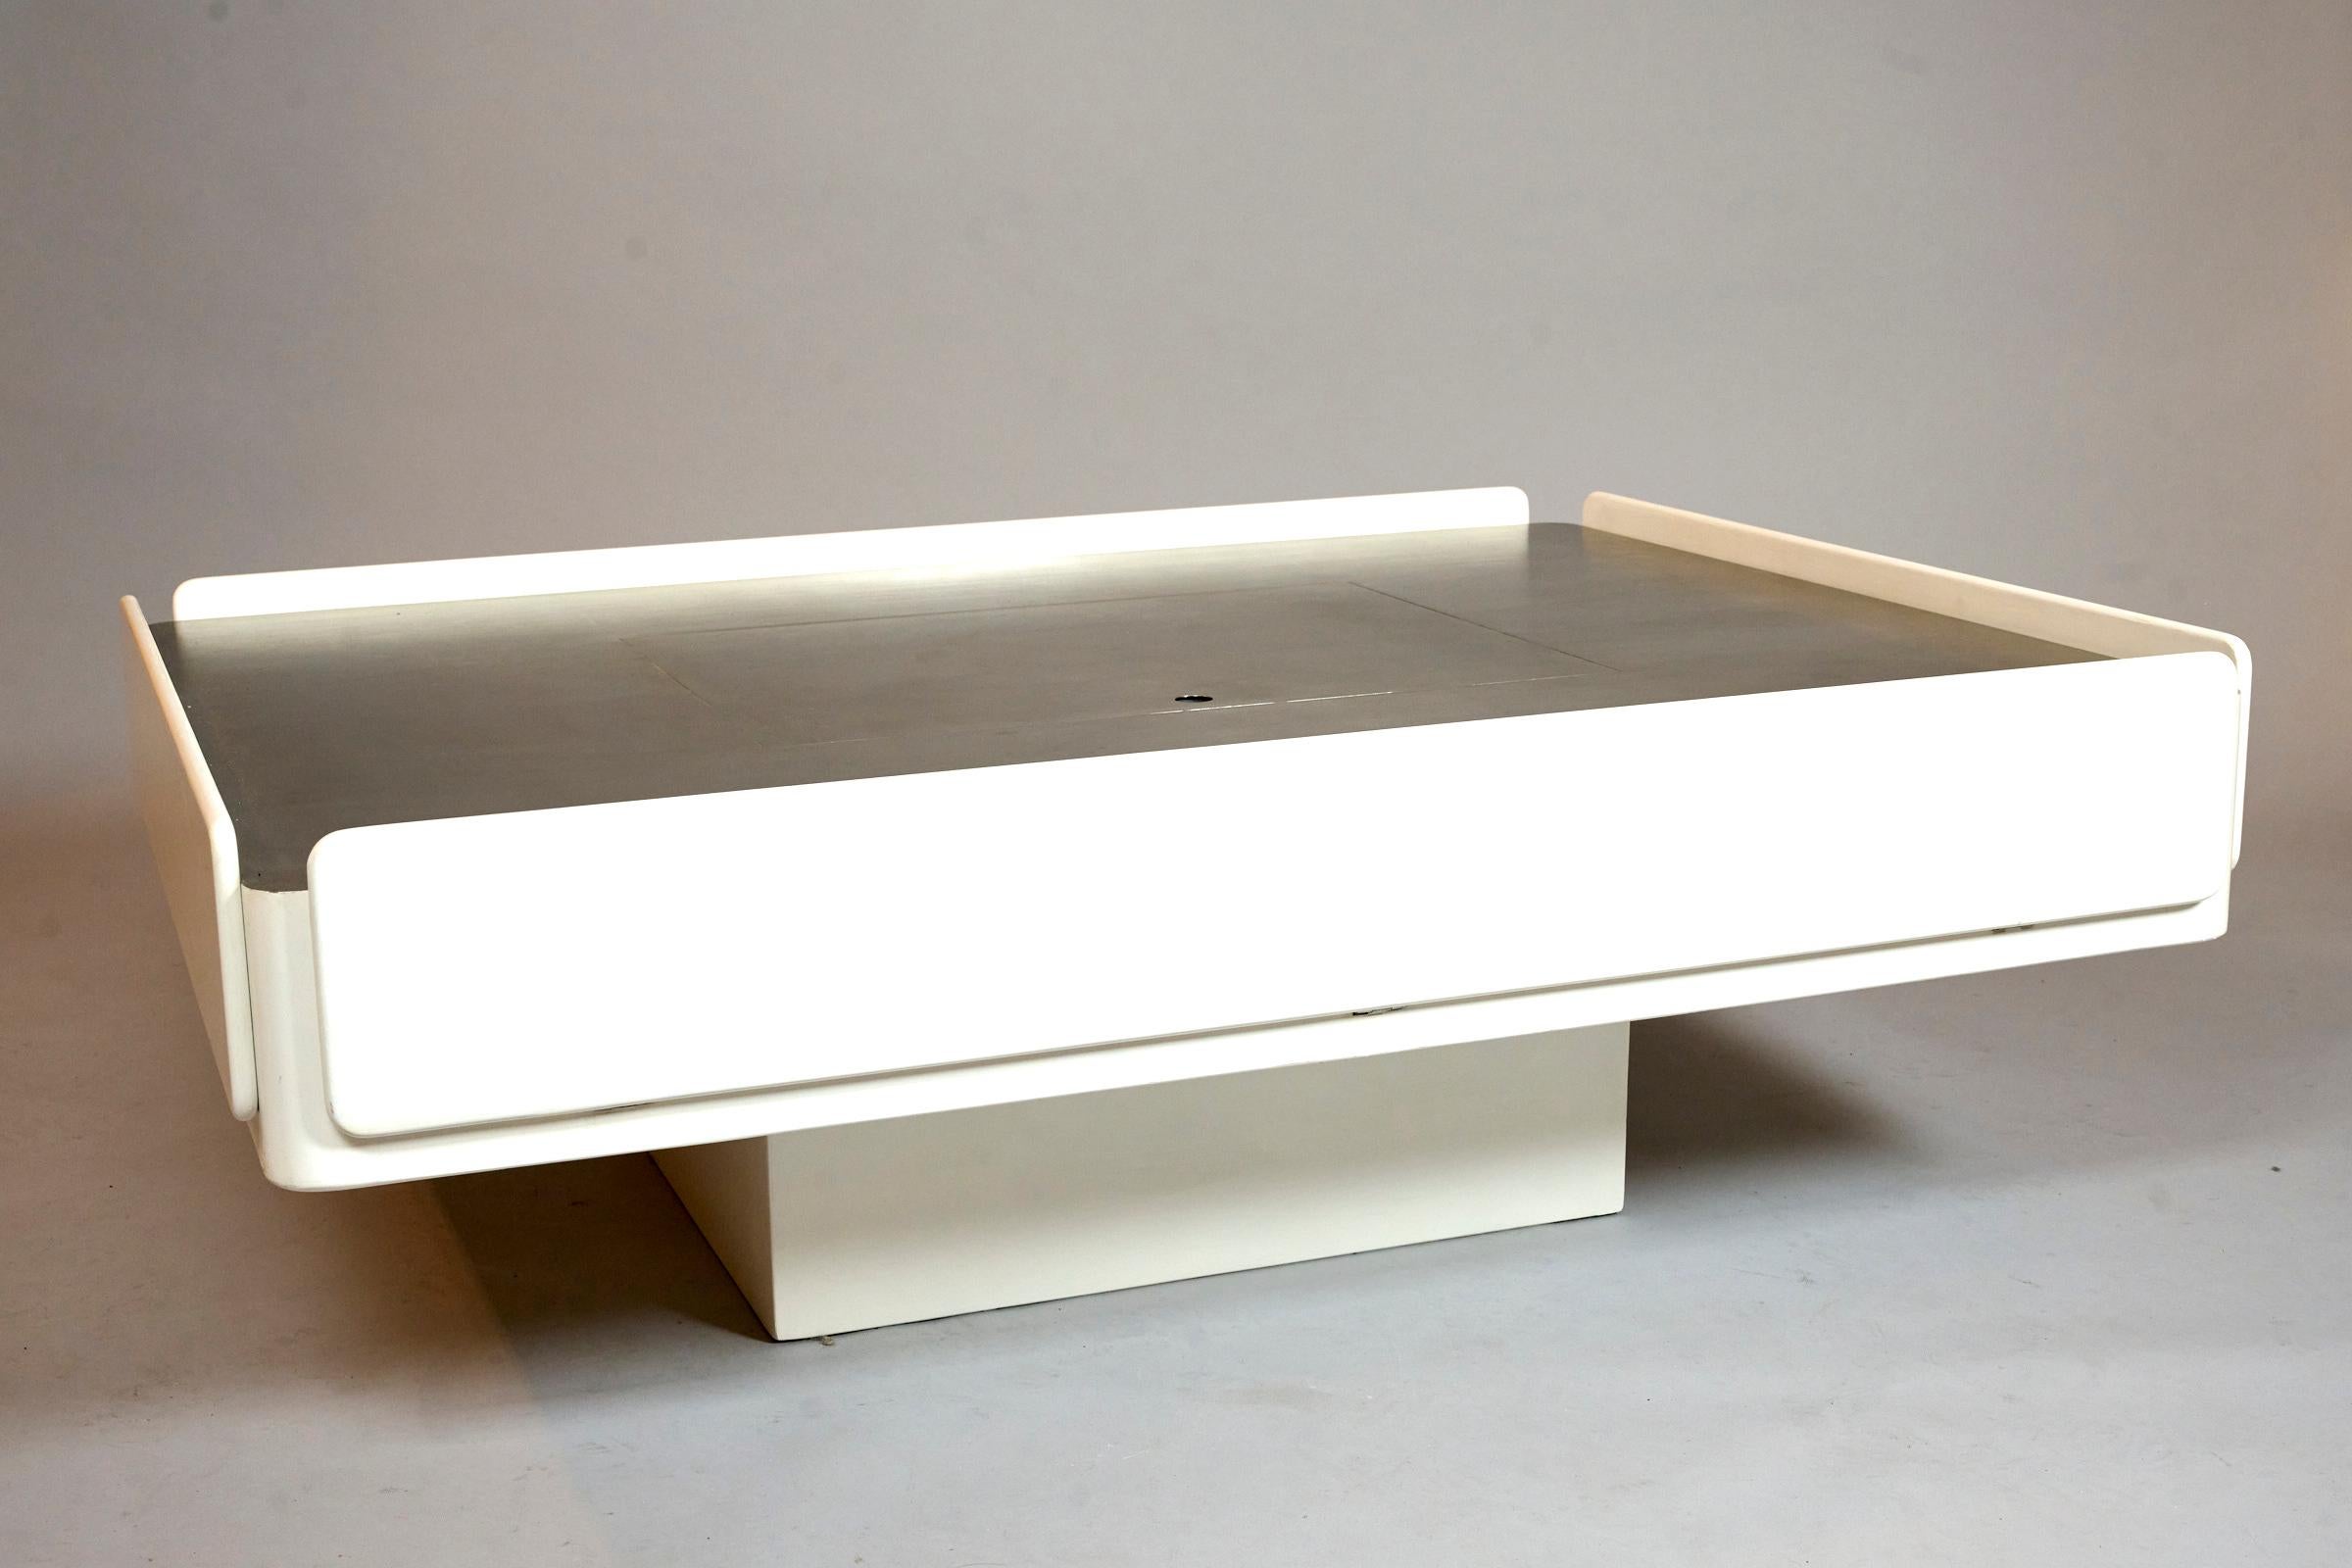 Iconic 'Caori' coffee table with storage. Italy c1962

Matt white lacquer and stainless steel

Ingenious coffee table with concealed storage

Contains two pull out drawers. Two flip down compartments on either side, and a lift up compartment